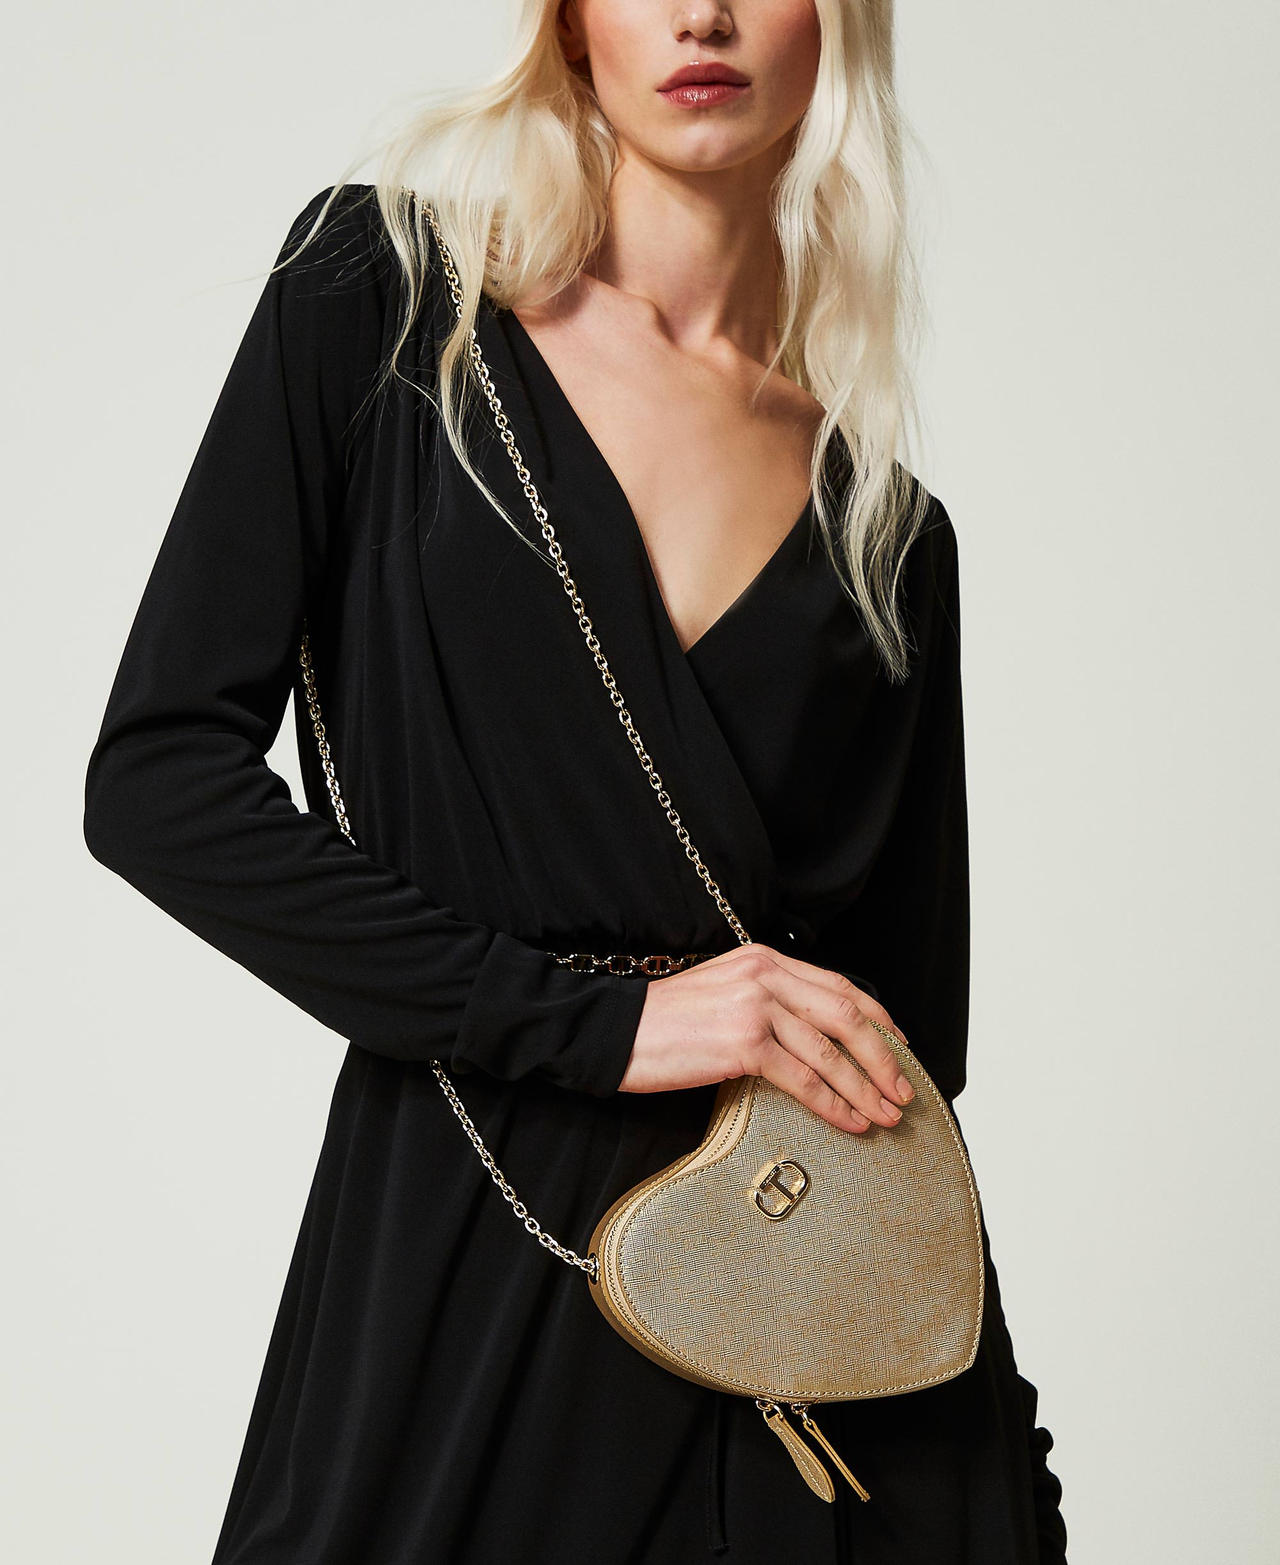 Mon Amour' heart-shaped bag Woman, Gold | TWINSET Milano